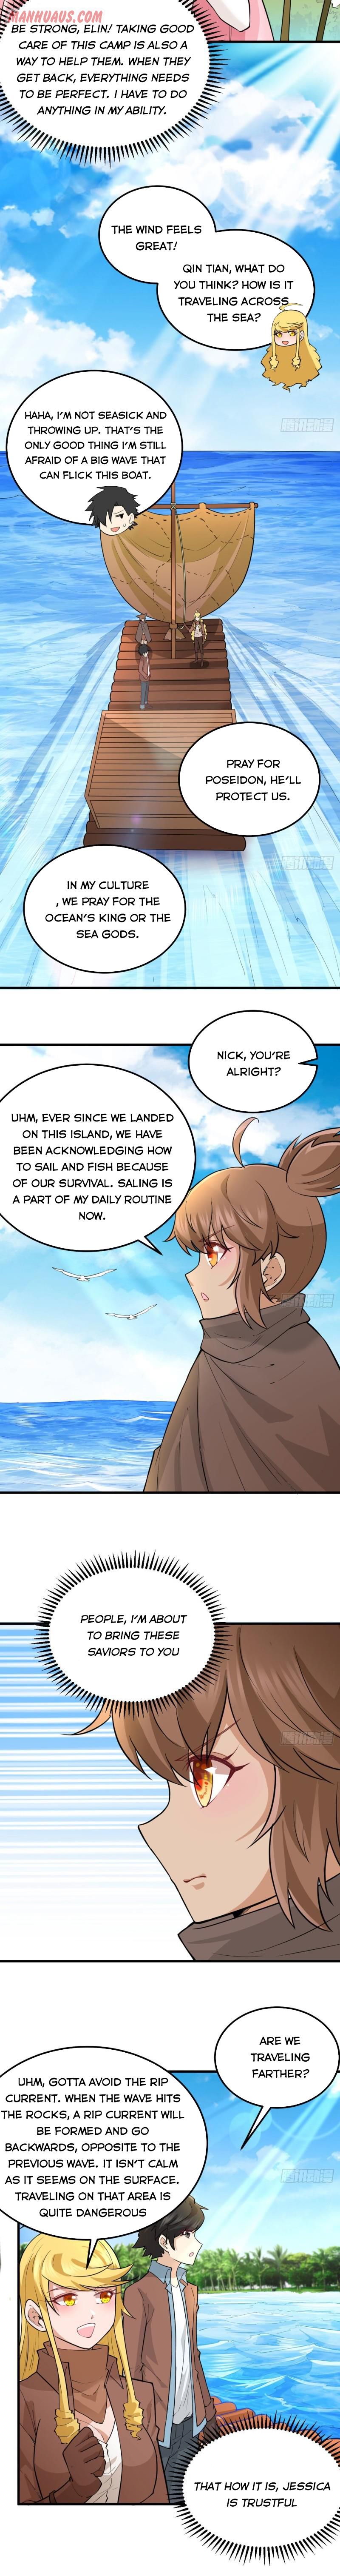 Survive On A Deserted Island With Beautiful Girls - Page 3